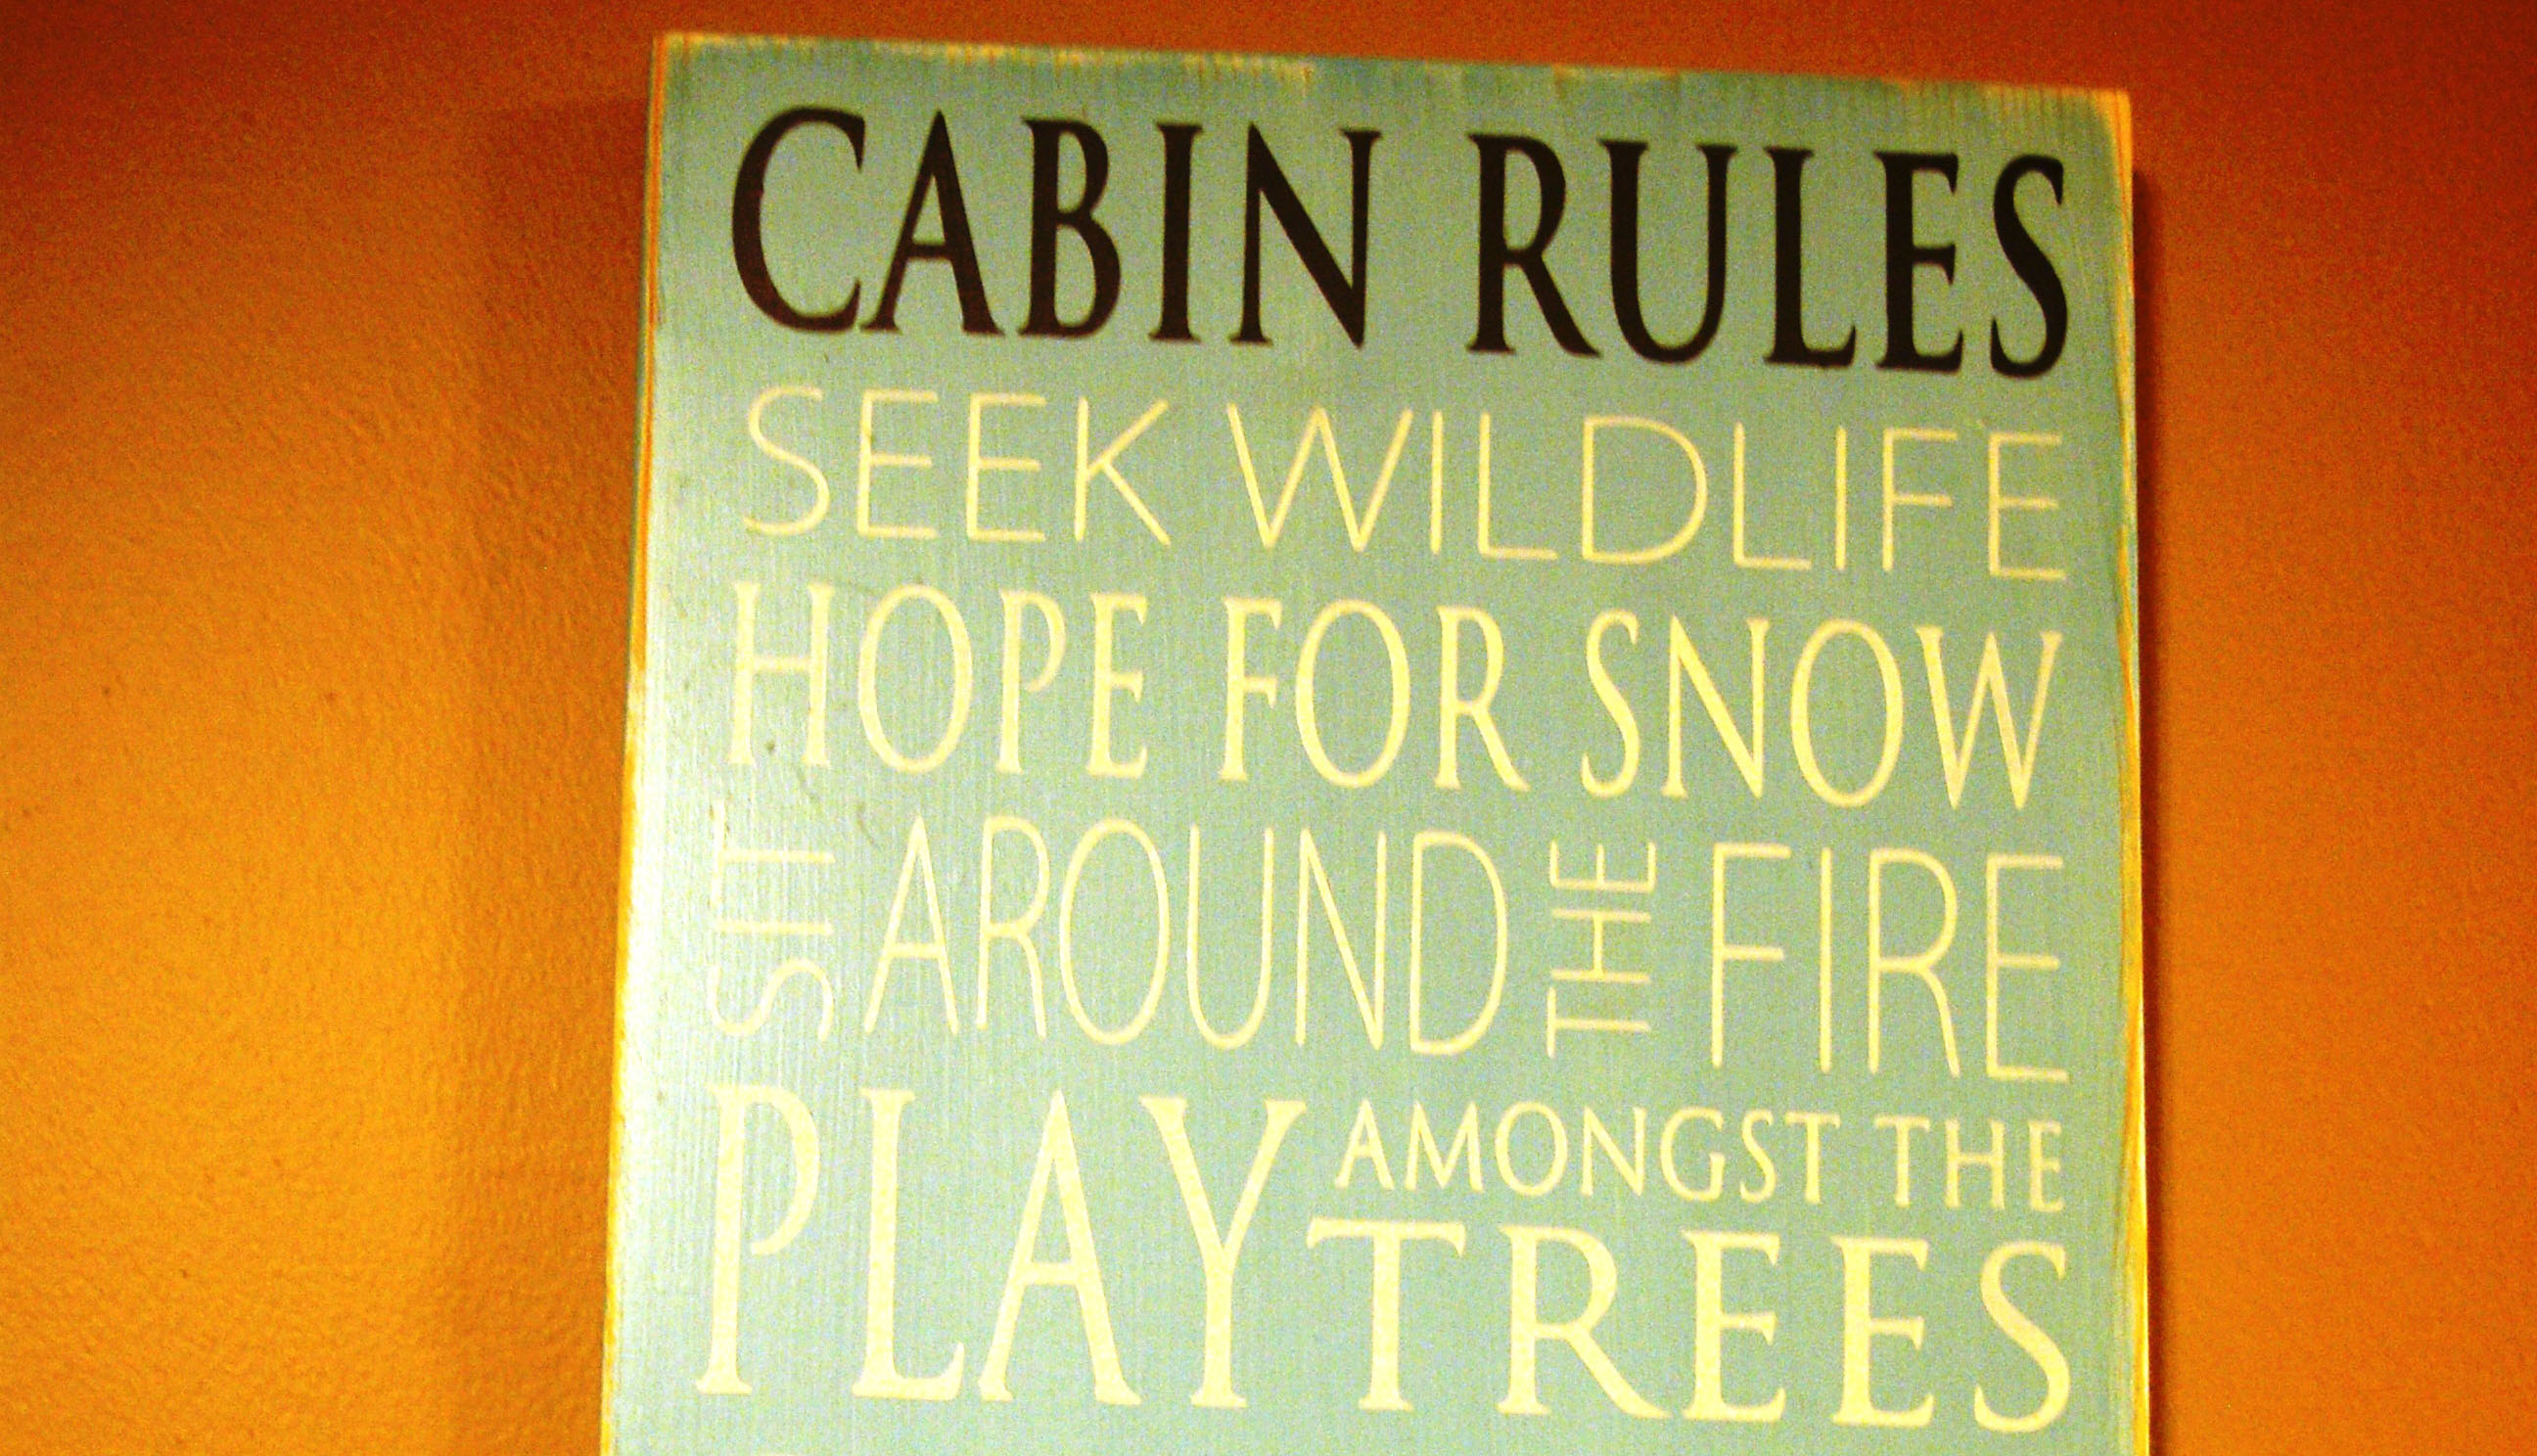 Cabin Rules: Relax and chill out!